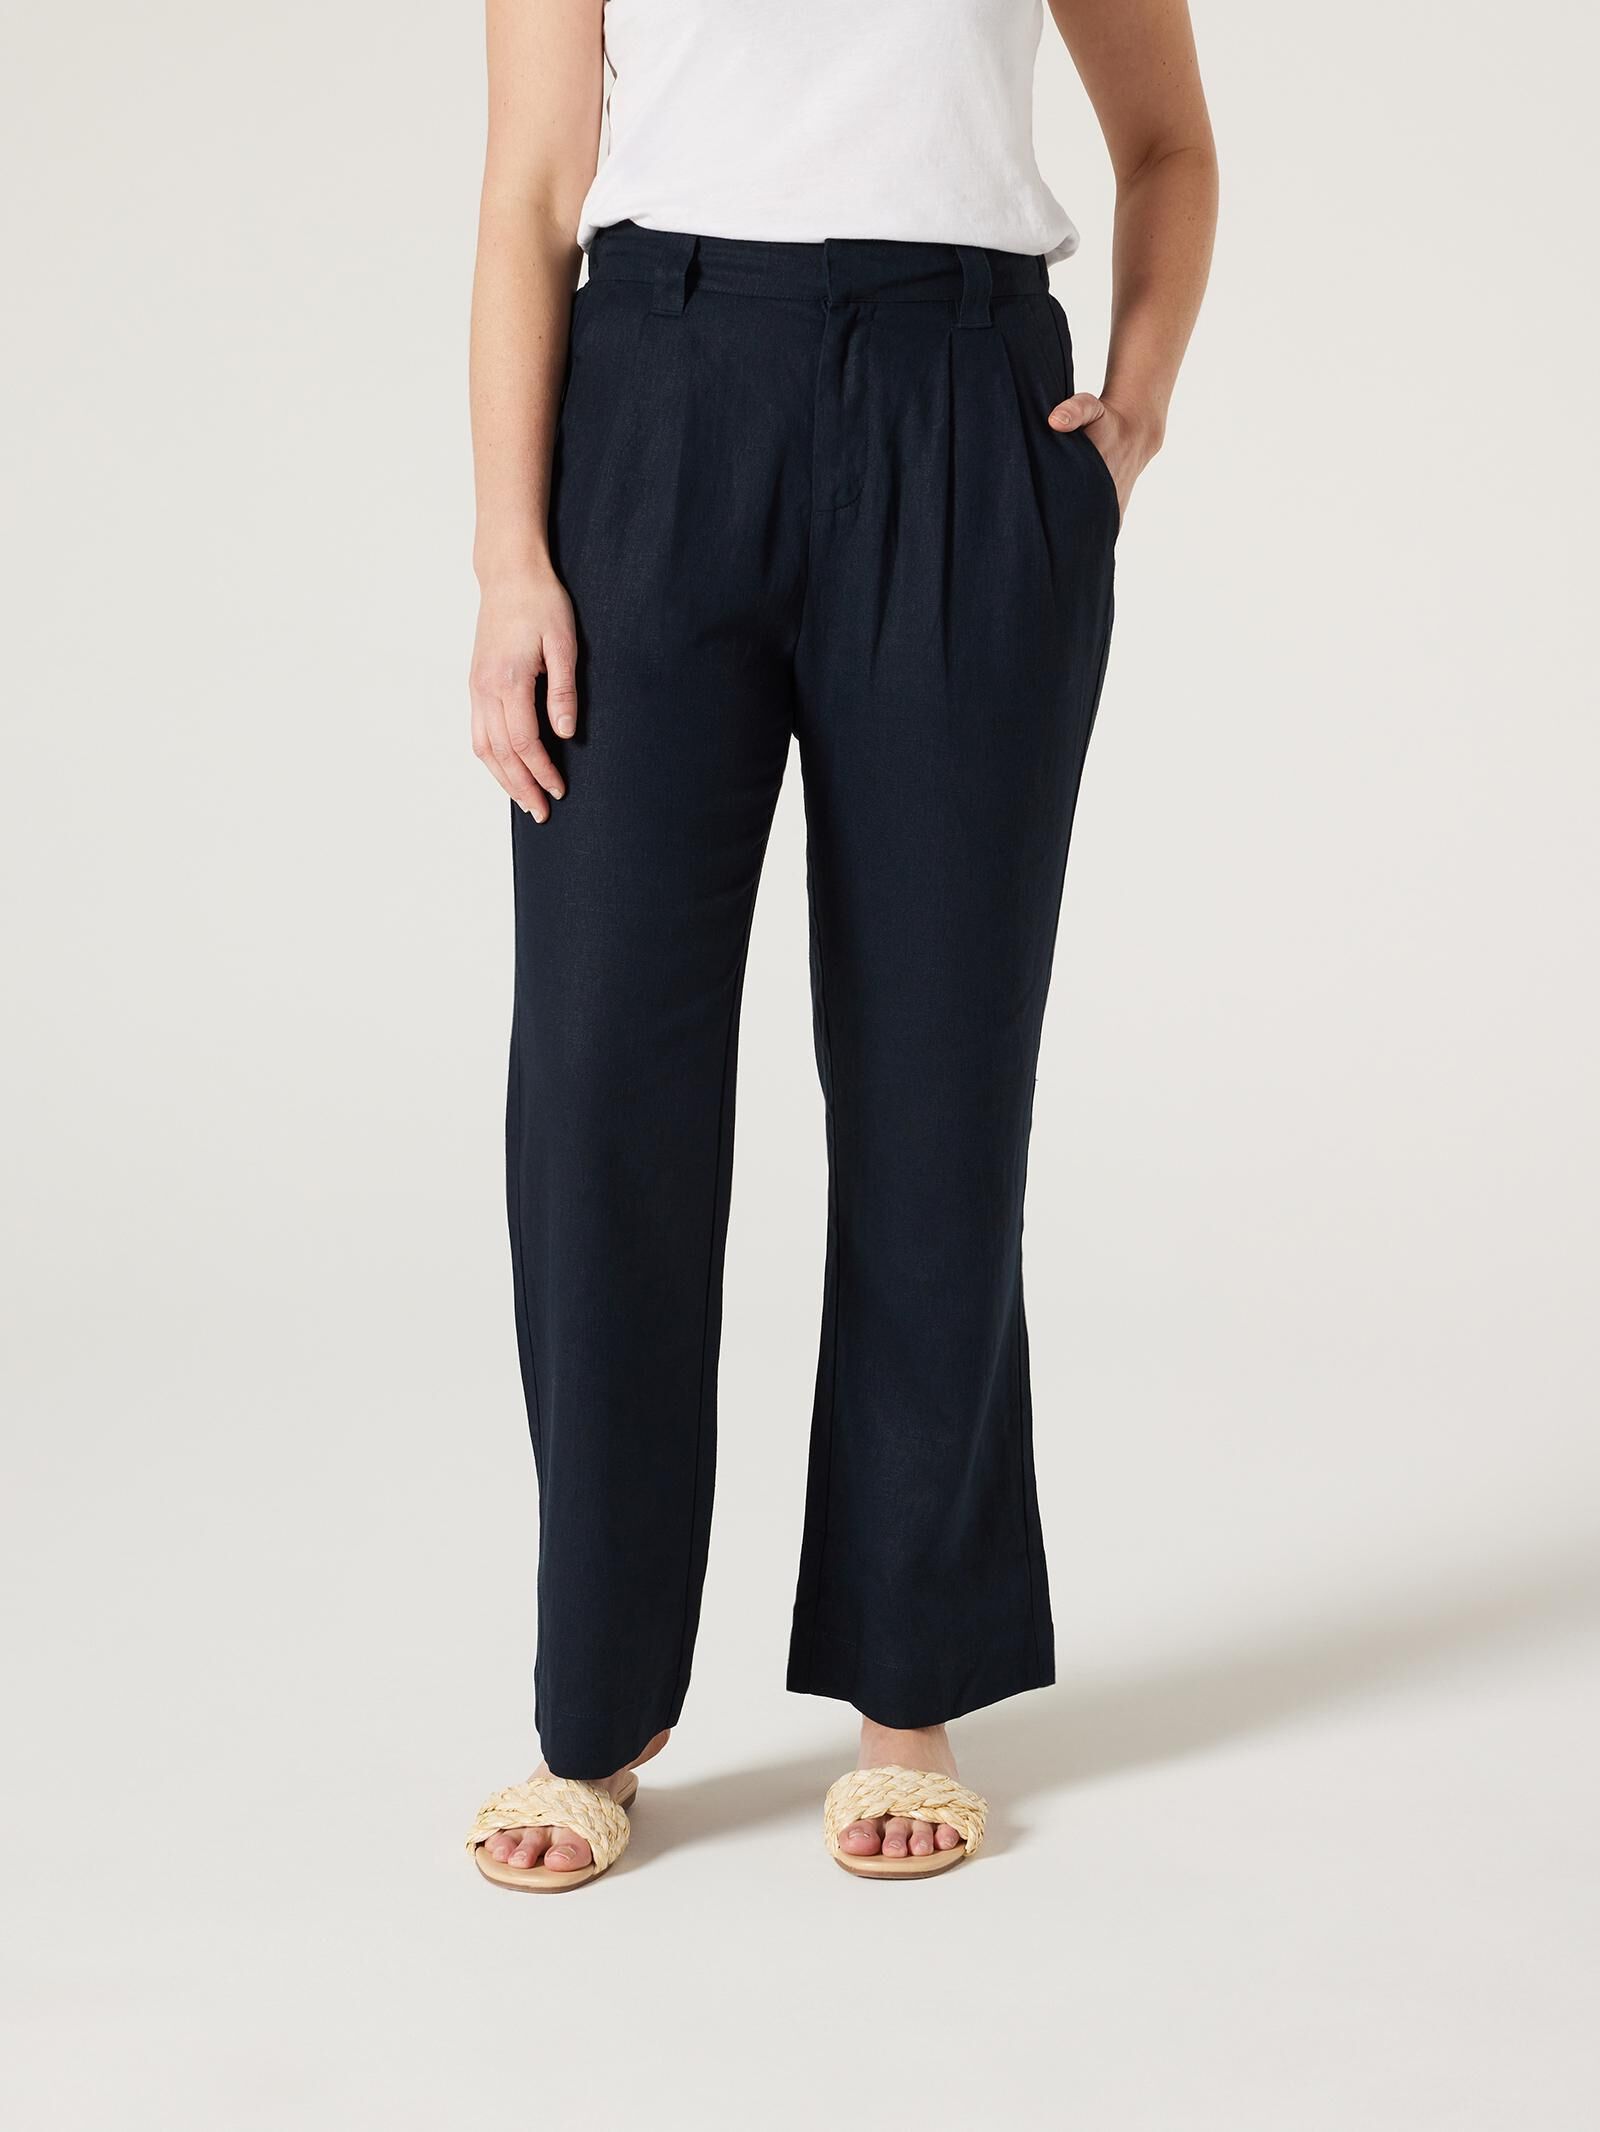 Buy STOP Natural Solid Polyester Tailored Fit Women's Trousers | Shoppers  Stop